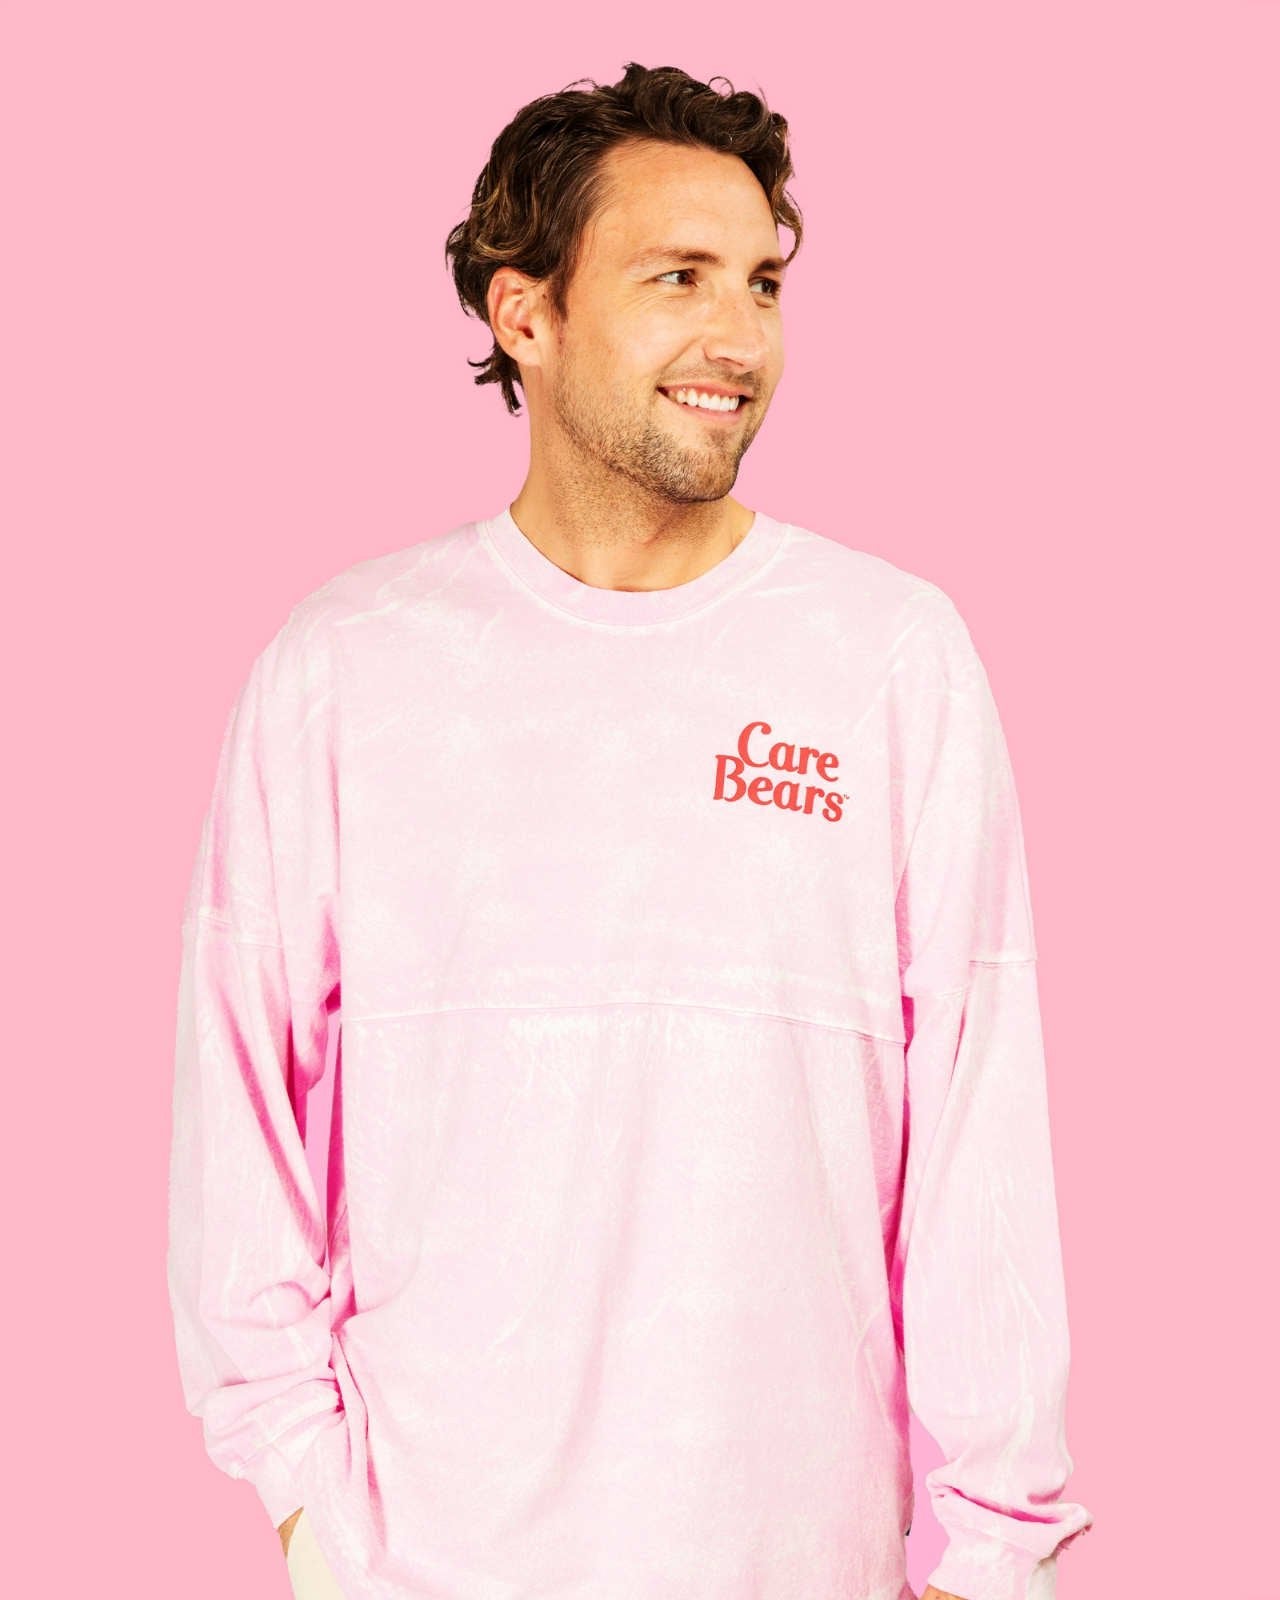 Care Your Heart Out, Love - a - Lot Bears™ Care Bears™ Classic Spirit Jersey® 6